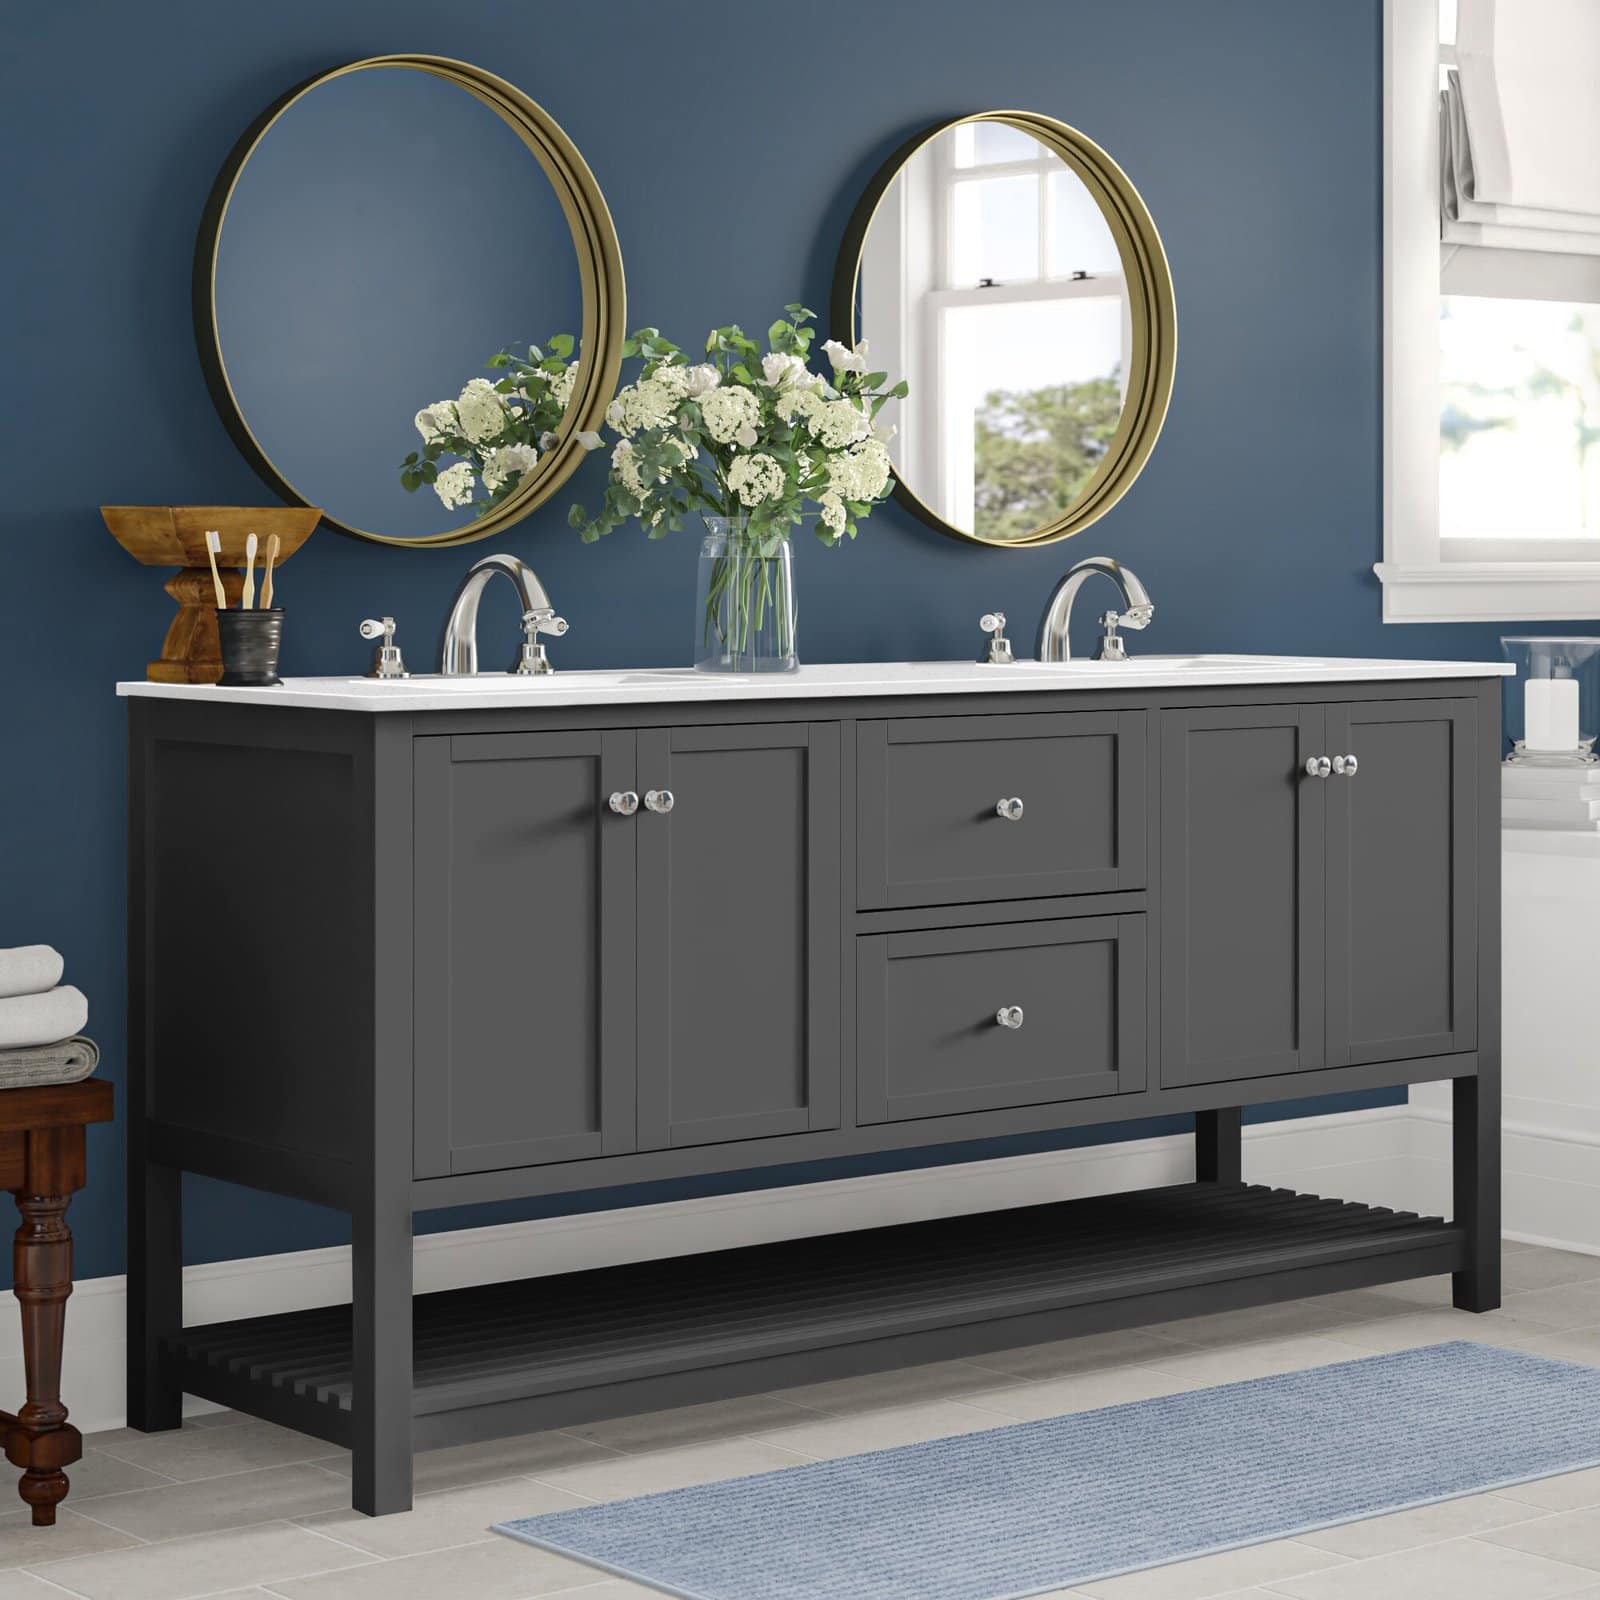 Grey and Blue Bathroom With Gold Accents